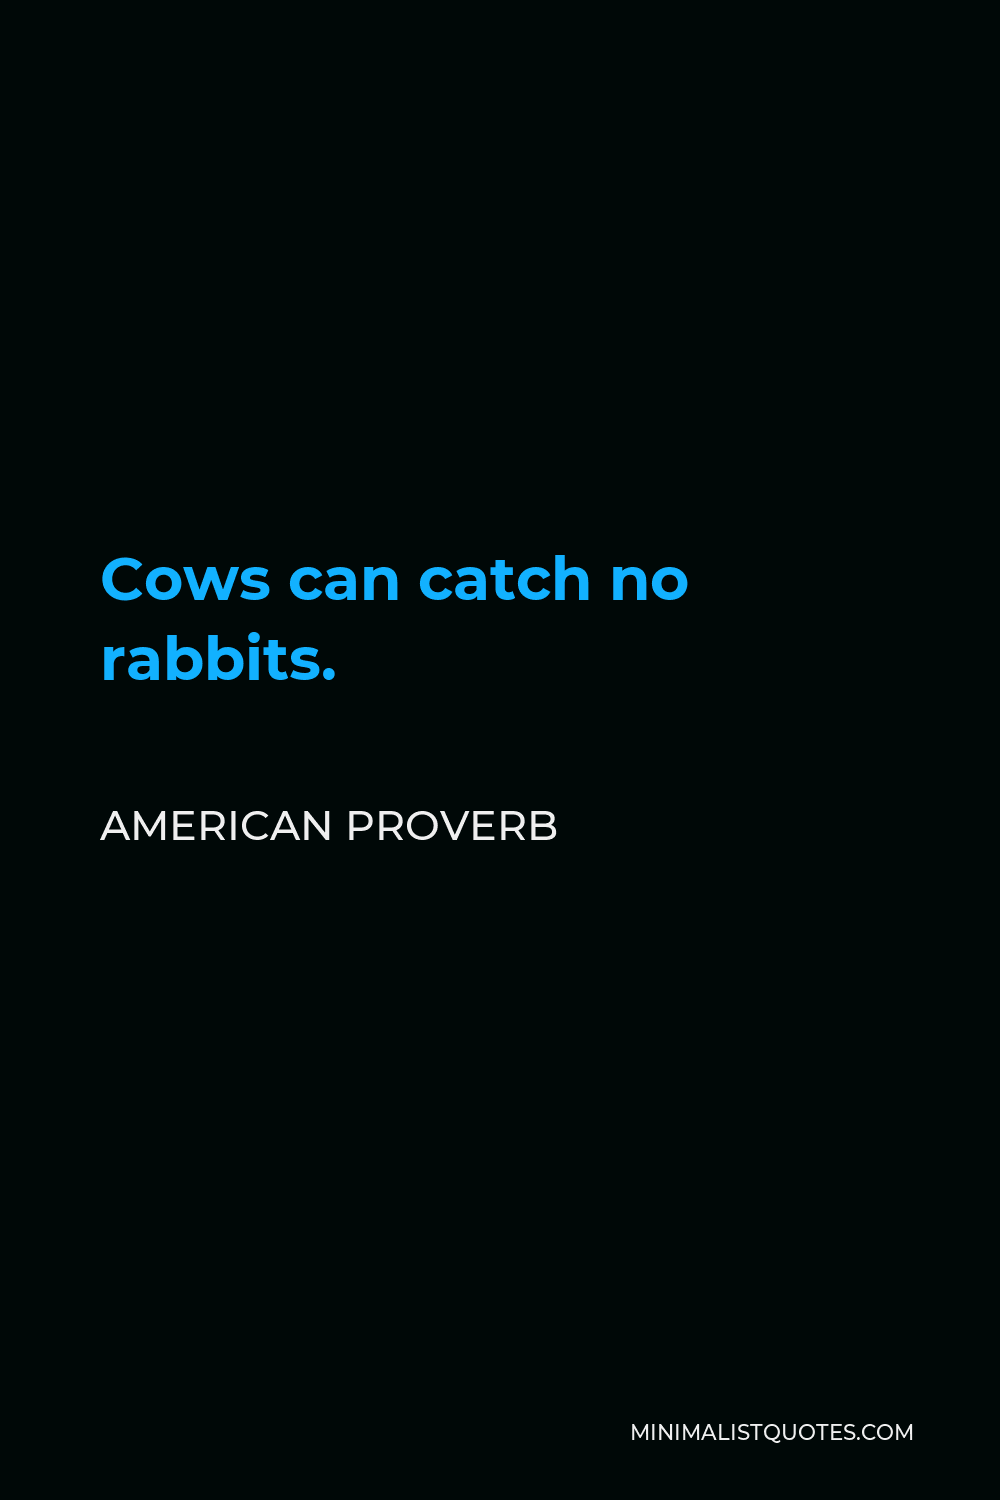 American Proverb Quote - Cows can catch no rabbits.